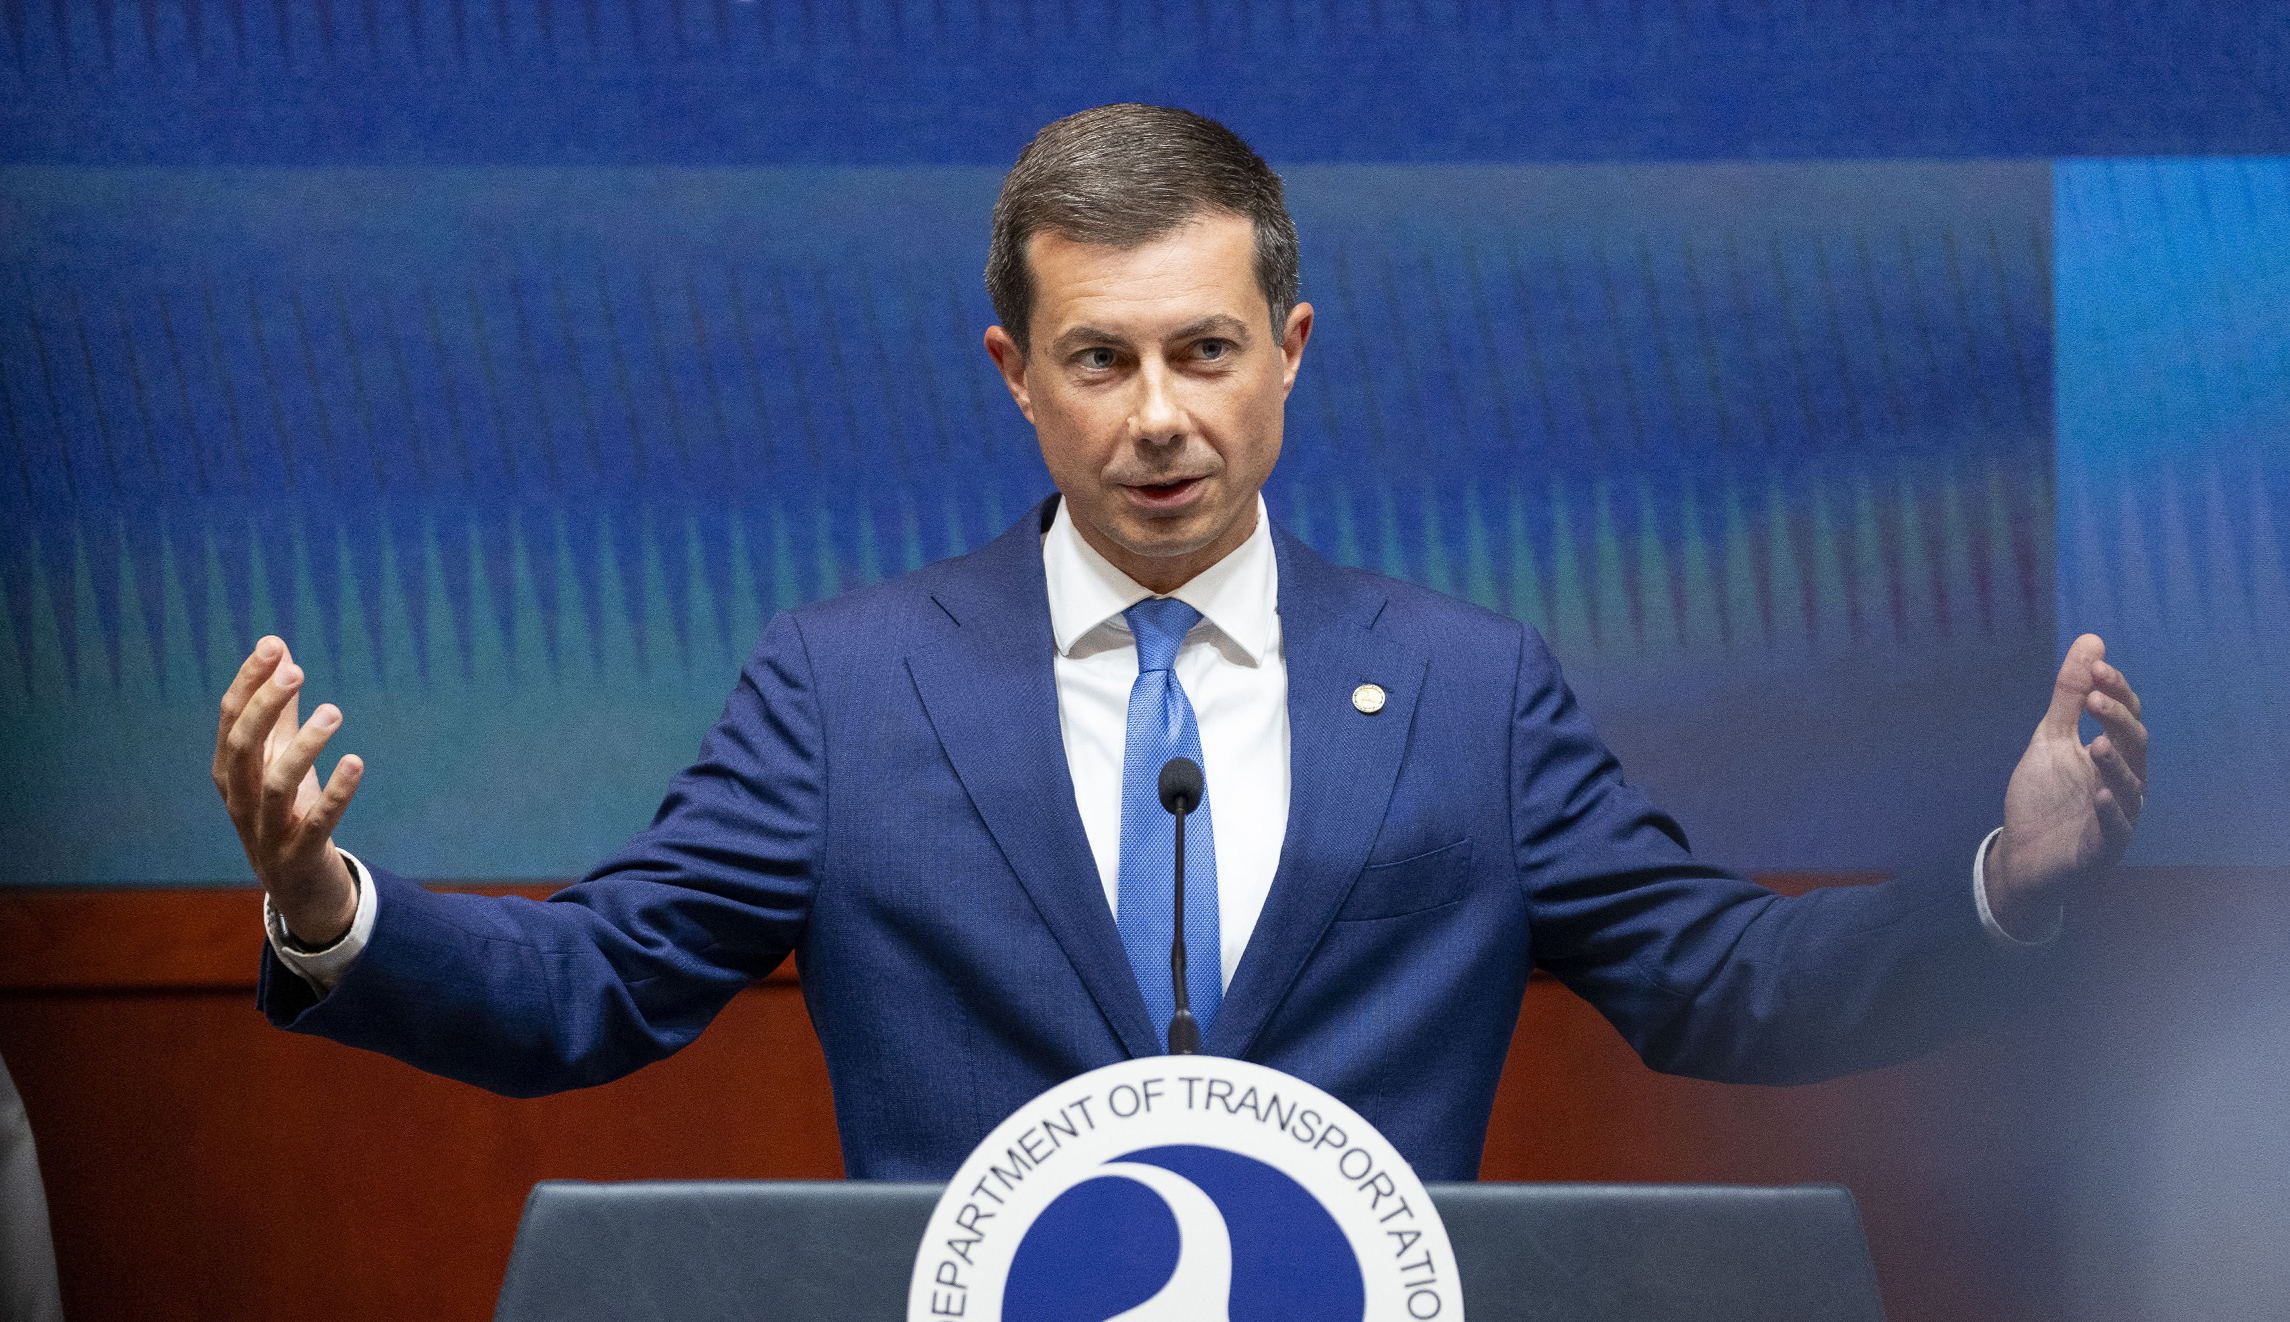 Buttigieg laments railroads’ excessive profitability, one year after East Palestine incident